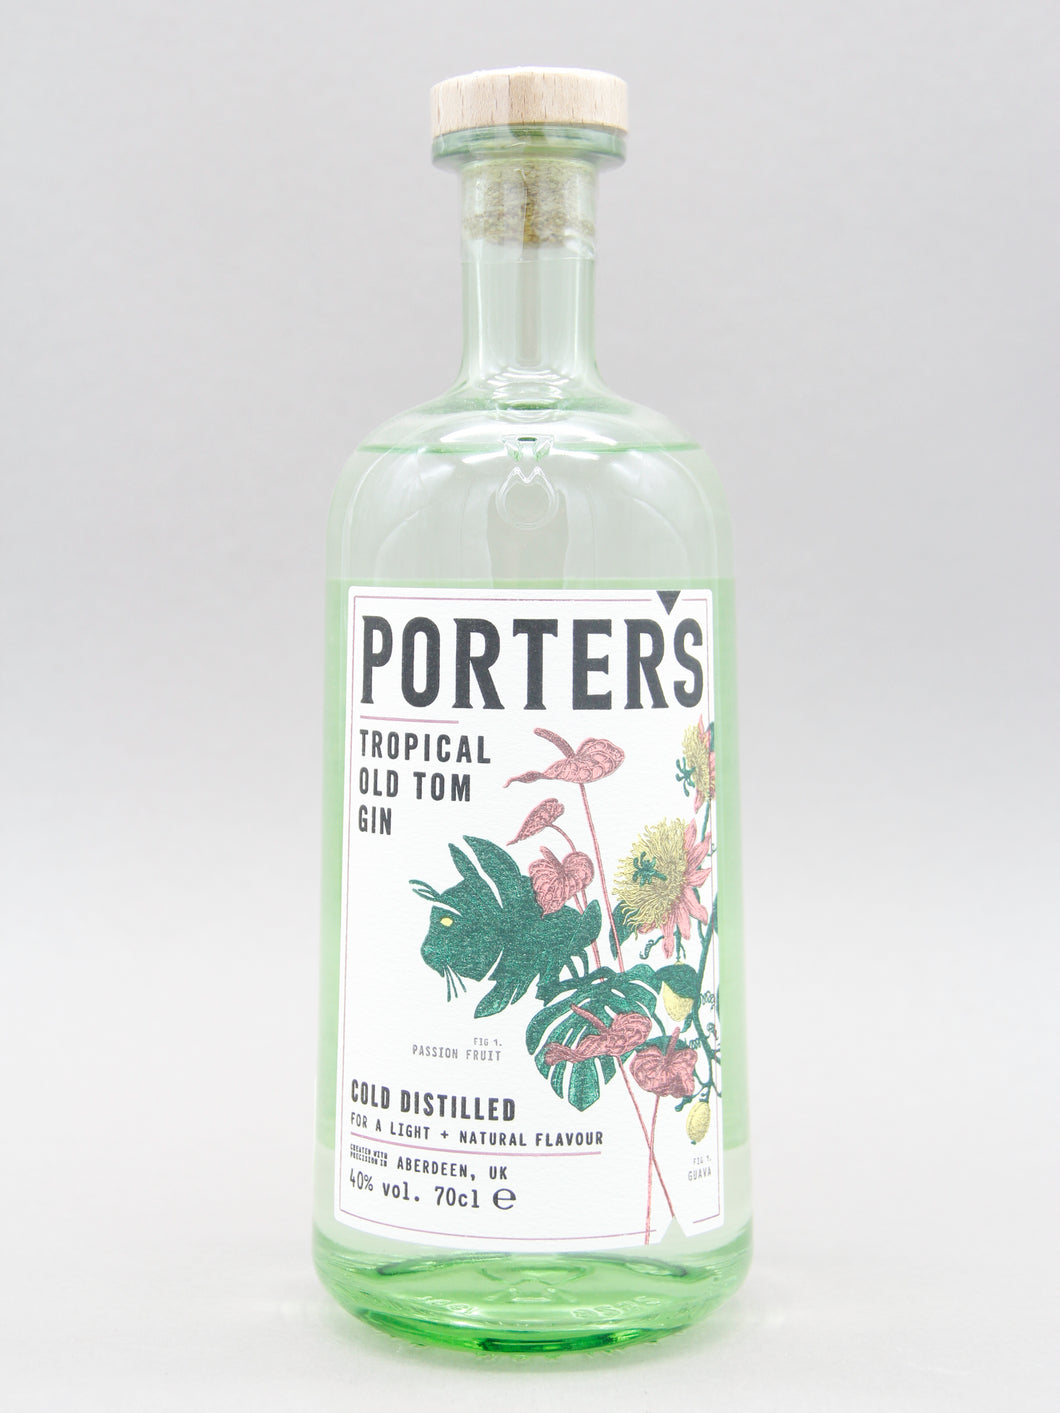 Porter's Tropical Old Tom Gin, Scotland (40%, 70cl)